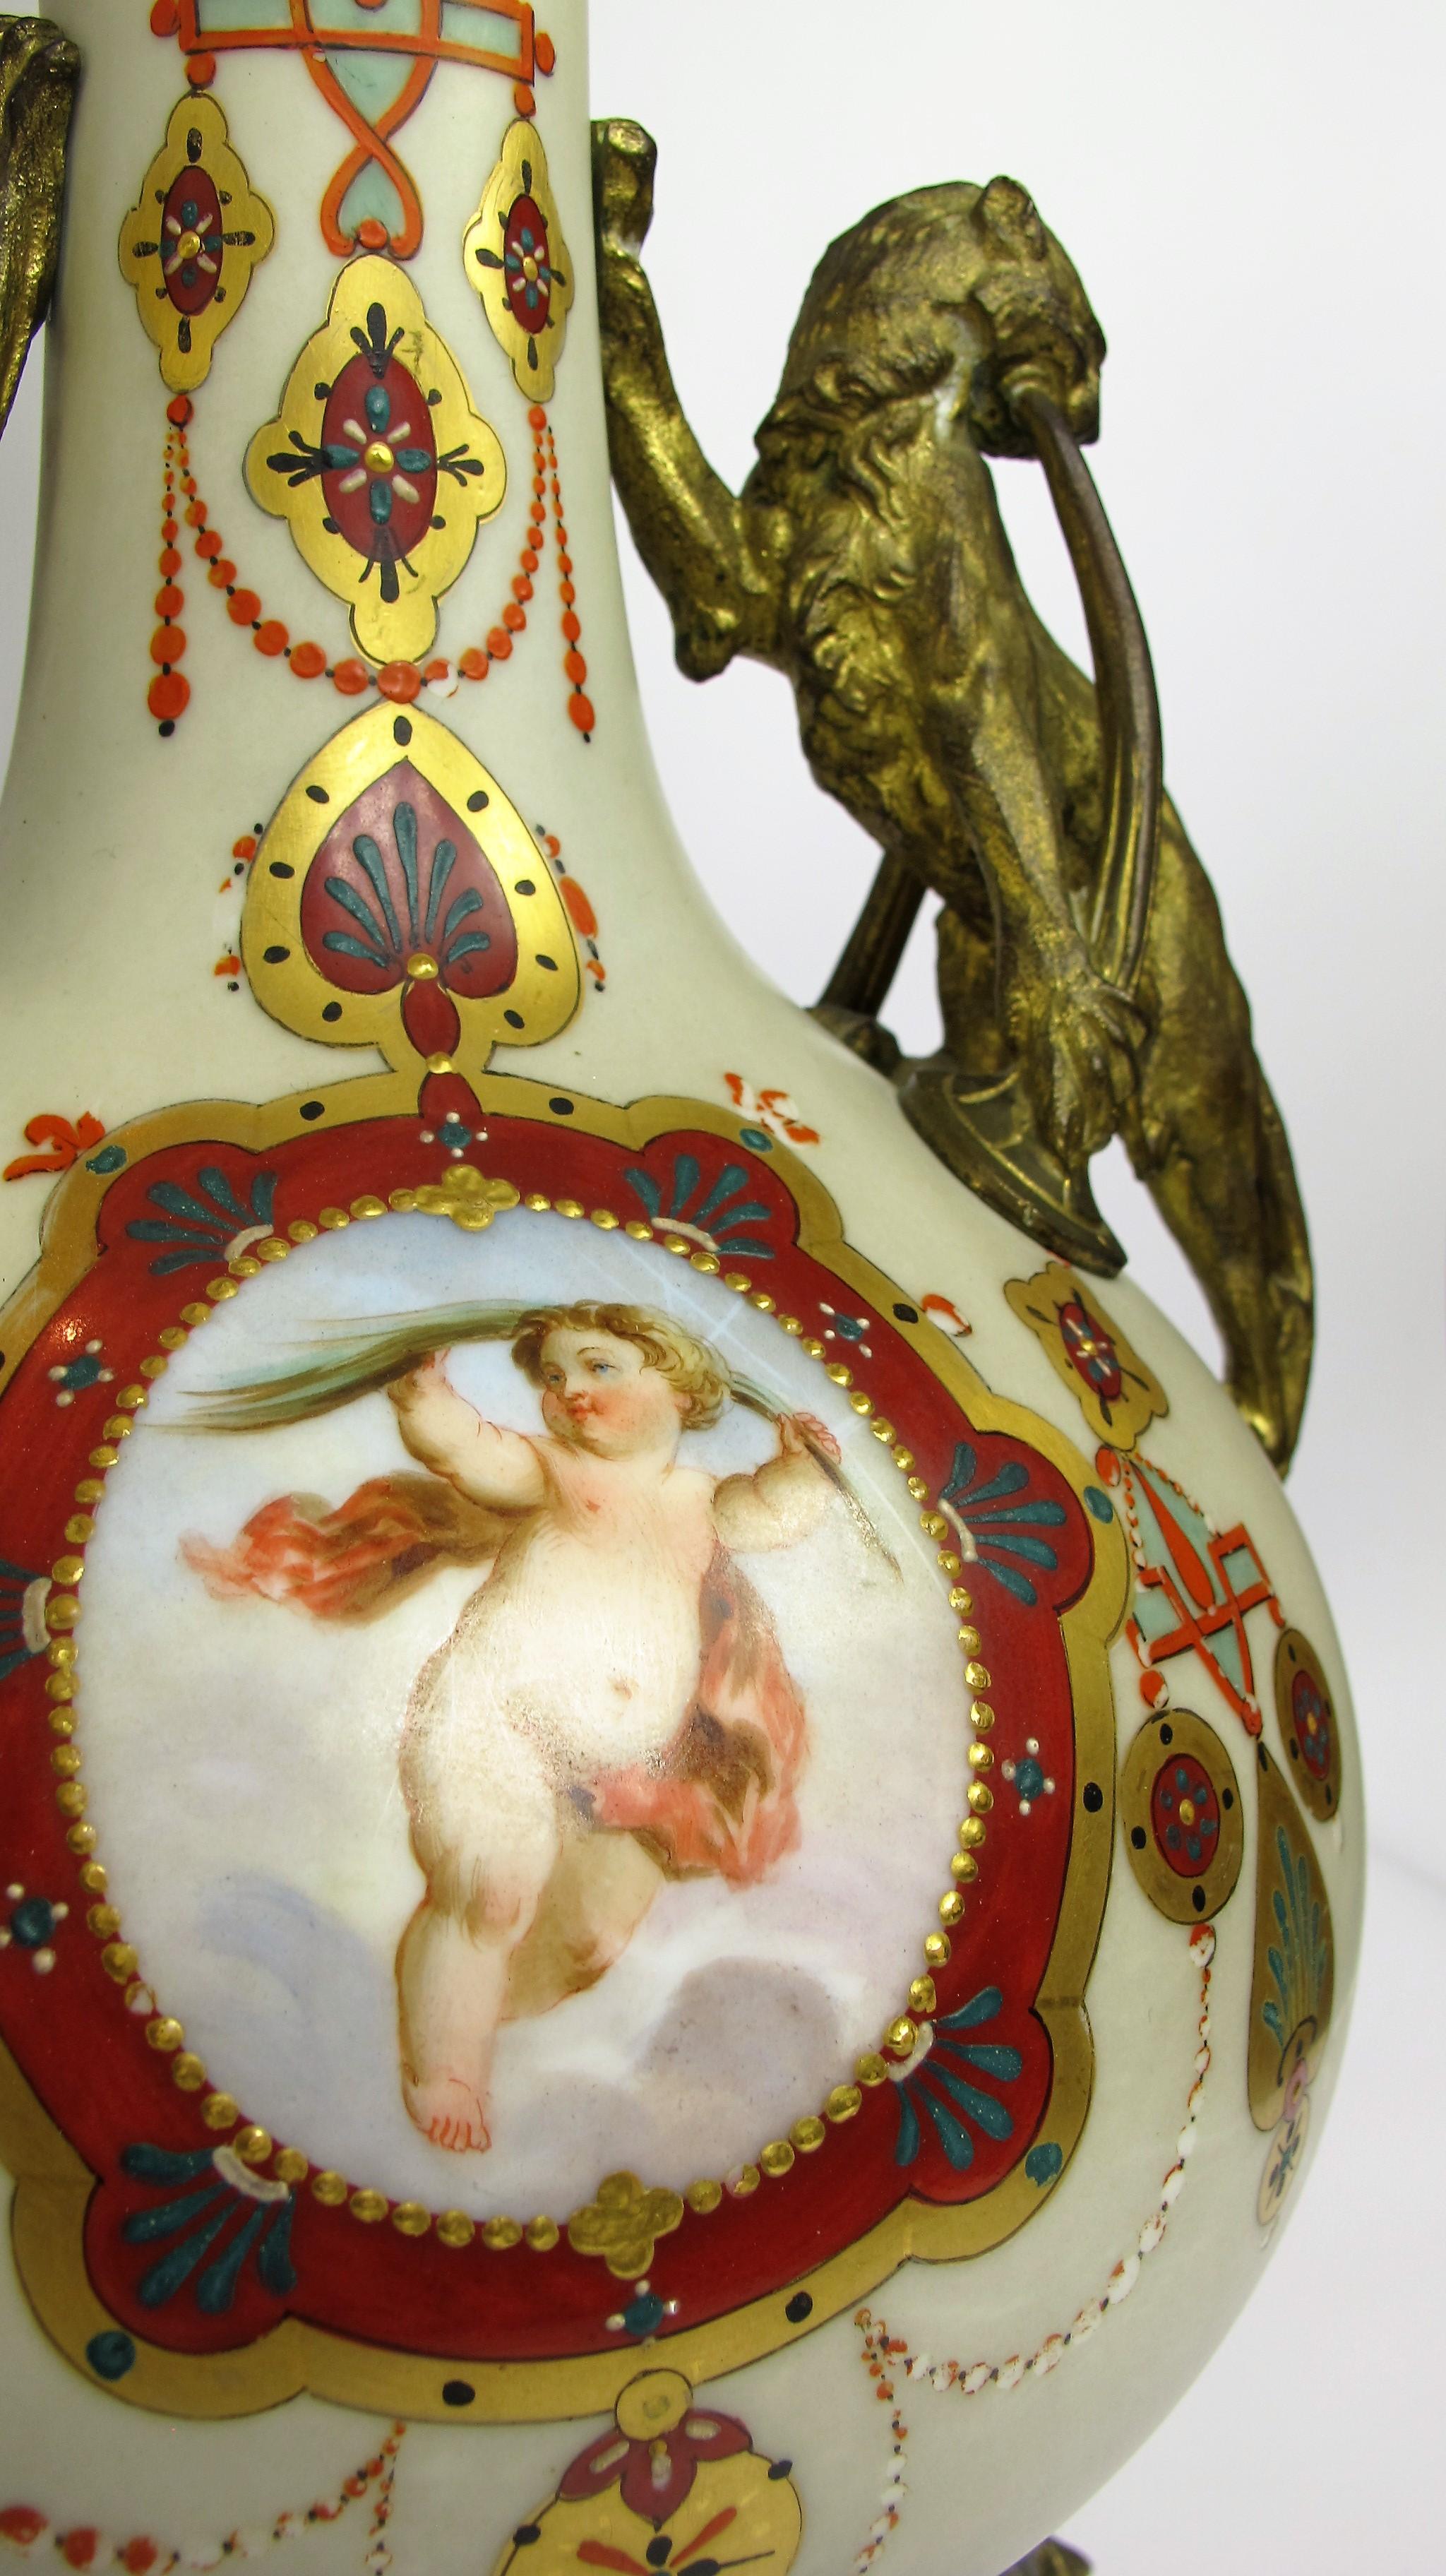 Large pair of neoclassical lamps inspired by the art of ancient Greece, white porcelain and polychrome decorations. The body of the lamp is delicately adorned with cartridges representing Putti in the air, among ancient architectural motifs. The